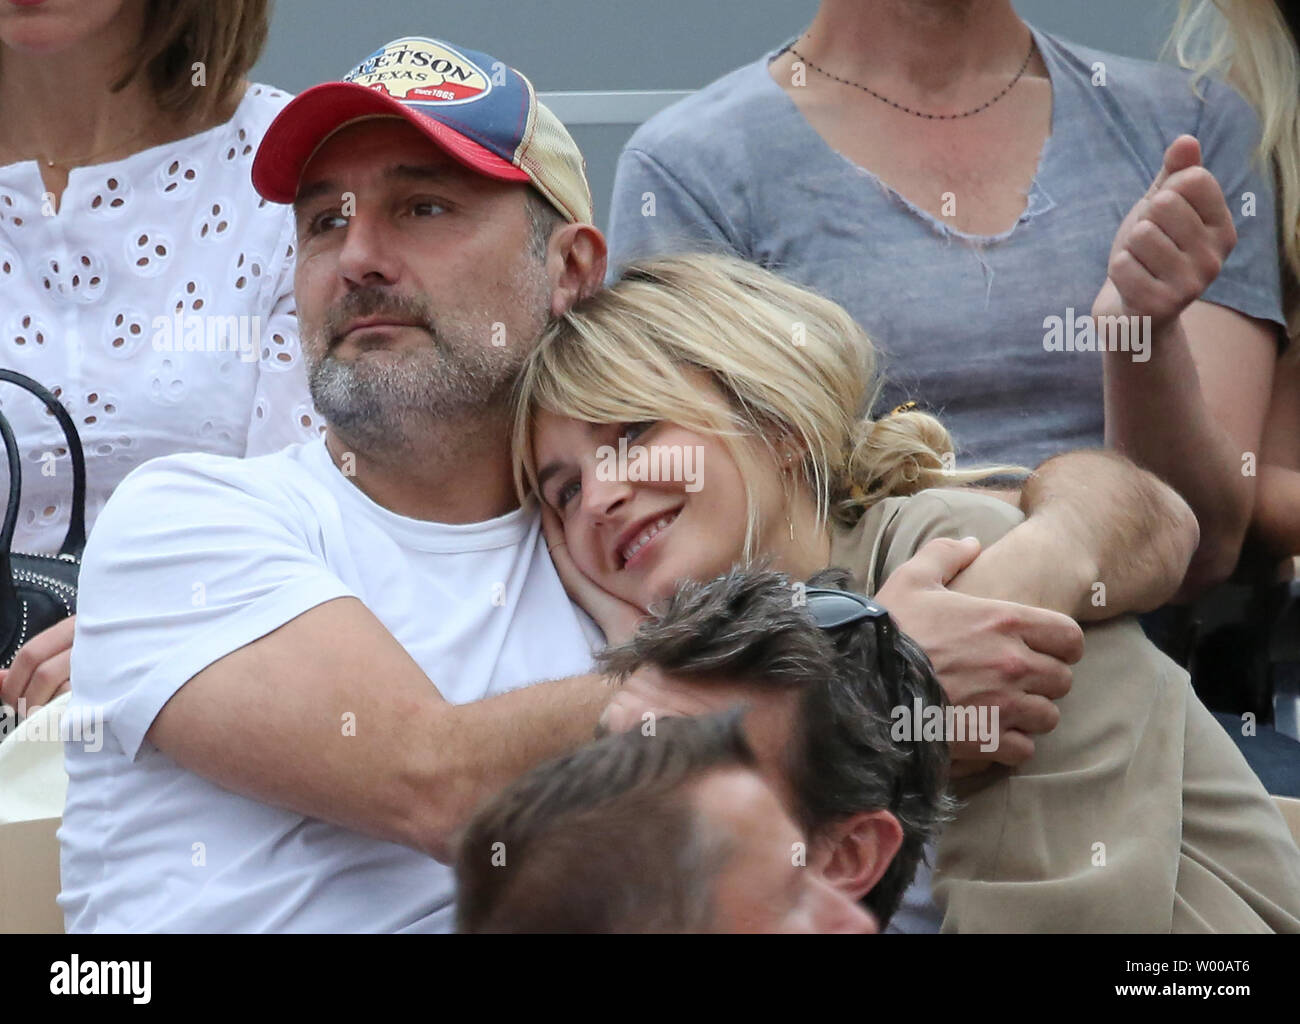 Gilles Lellouche (L) and Alizee Guinochet watch the French Open men's final match between Rafael Nadal of Spain and Dominic Thiem of Austria at Roland Garros in Paris on June 9, 2019. Nadal defeated Thiem 6-3, 5-7, 6-1, 6-1 to win his 12th French Open championship.   Photo by David Silpa/UPI Stock Photo